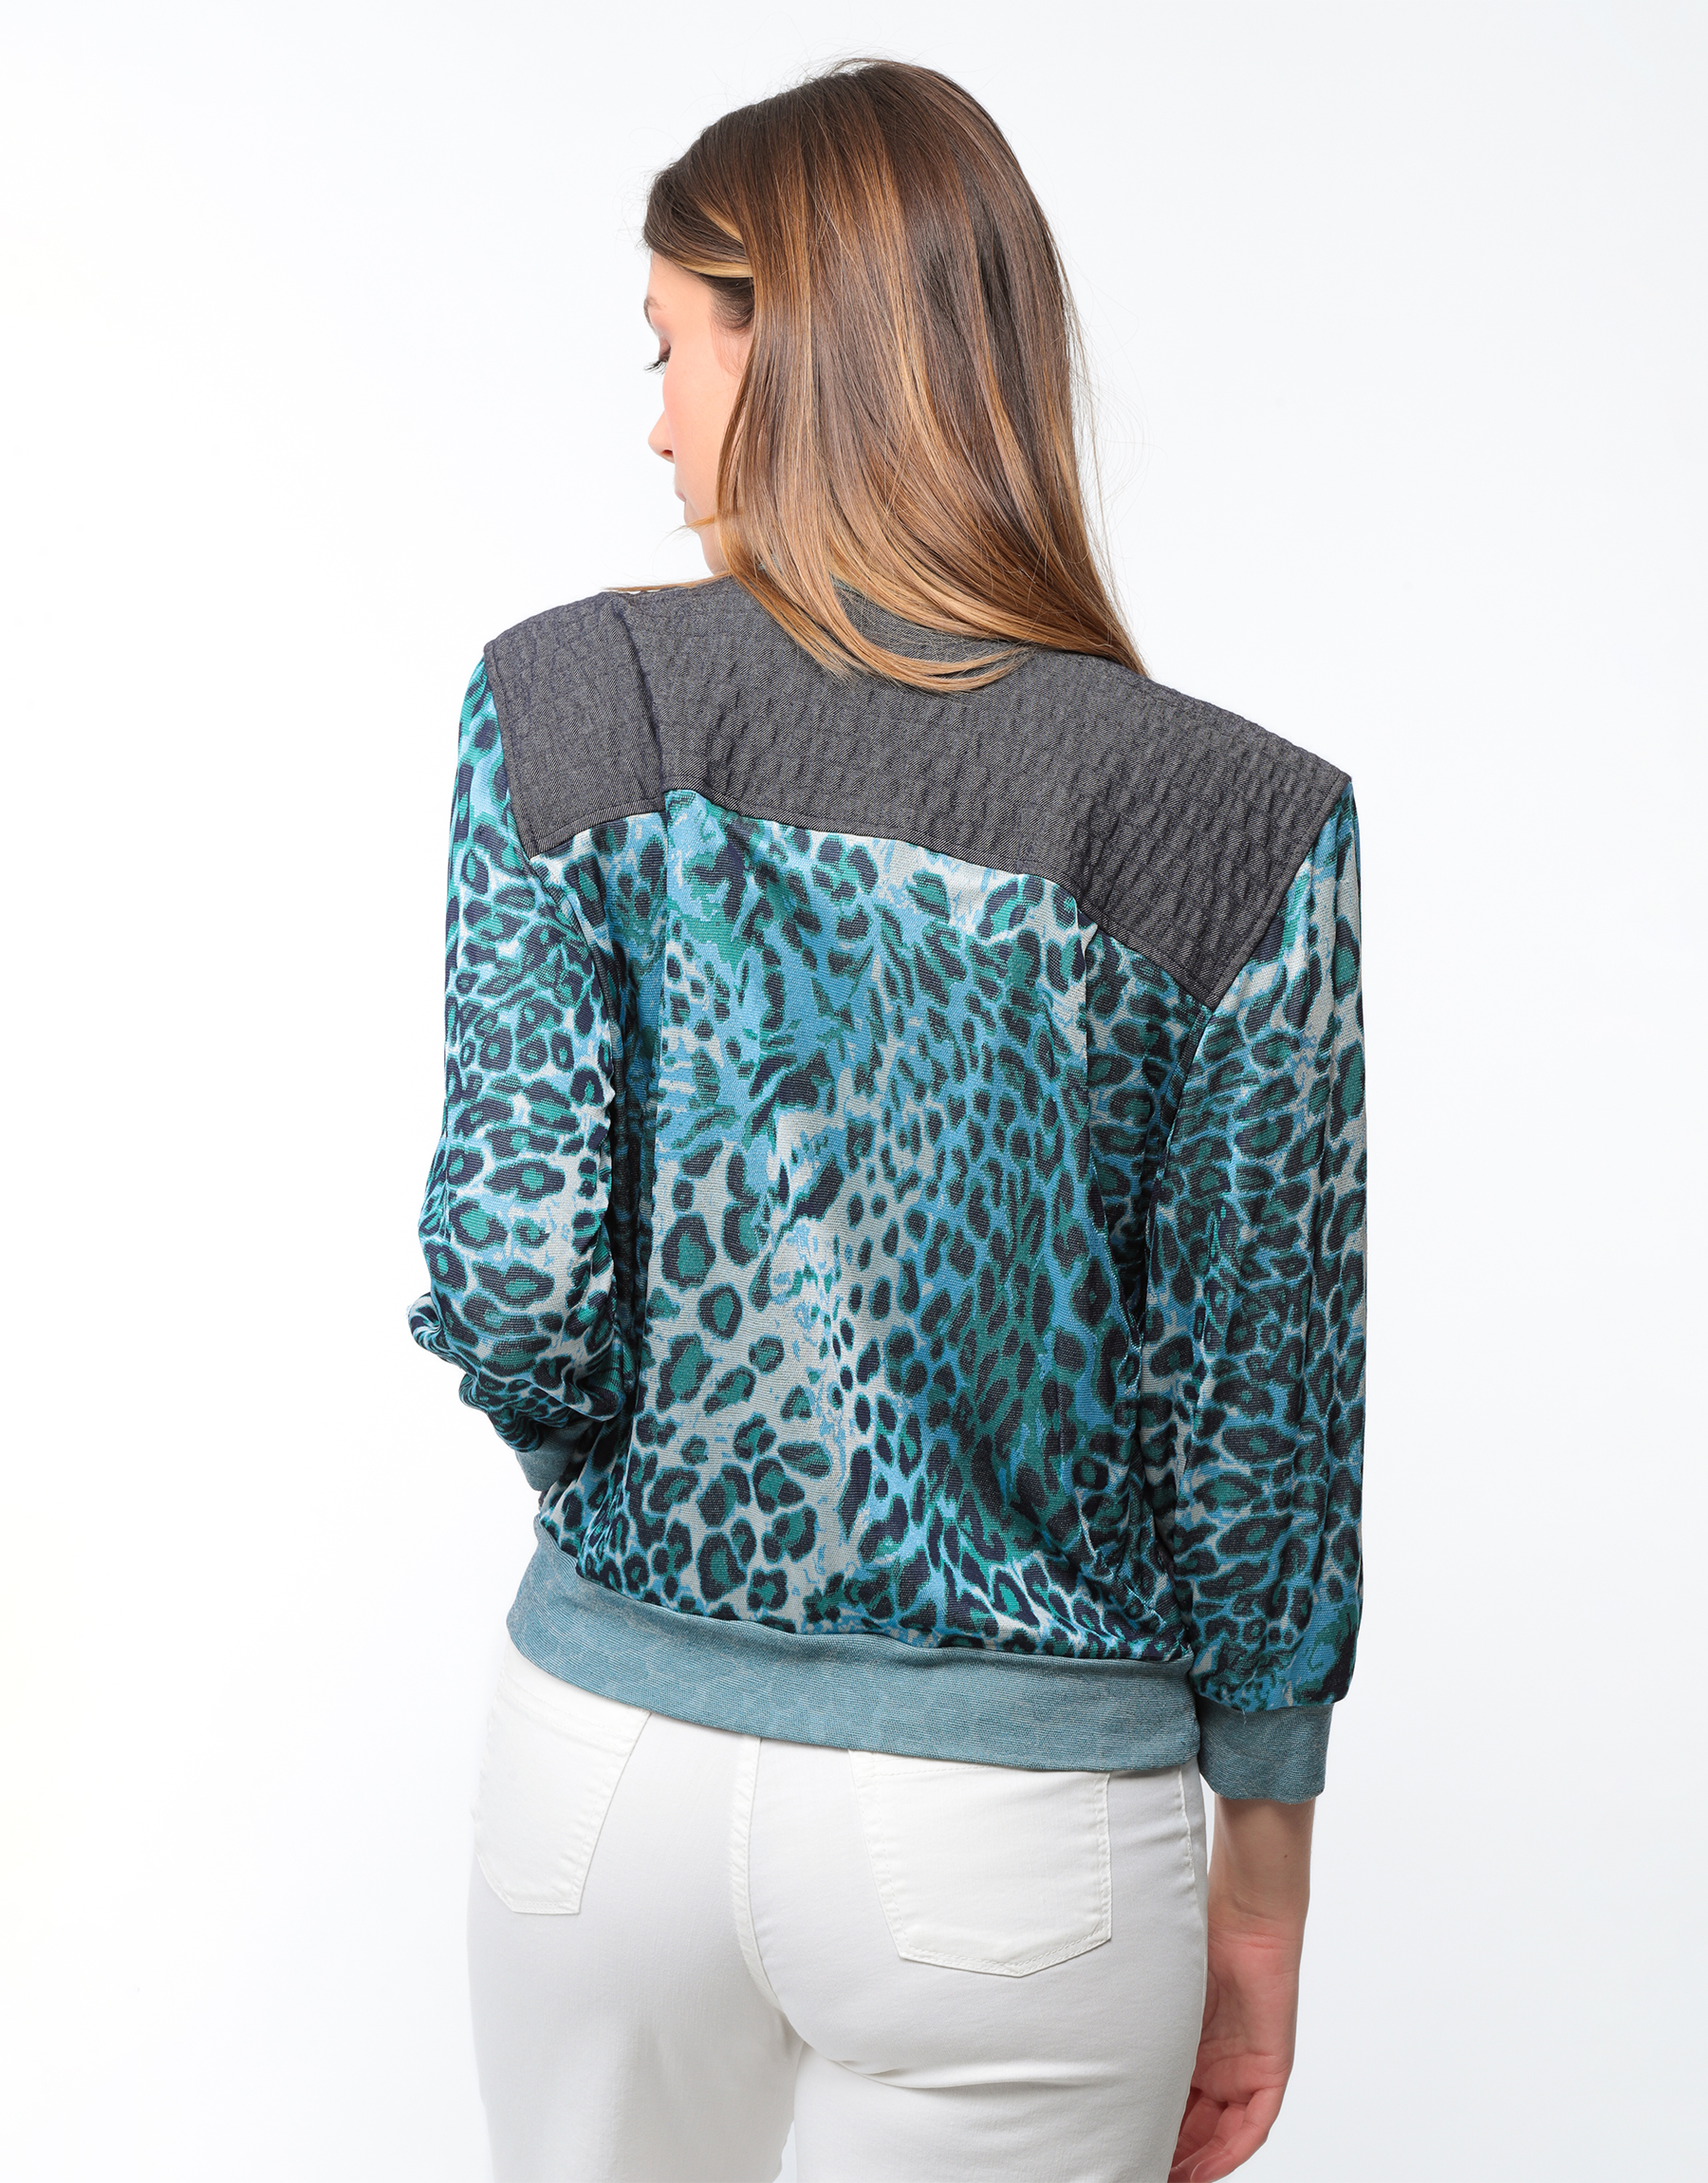 Jacket in bubbled denim and blue leopard print jersey 